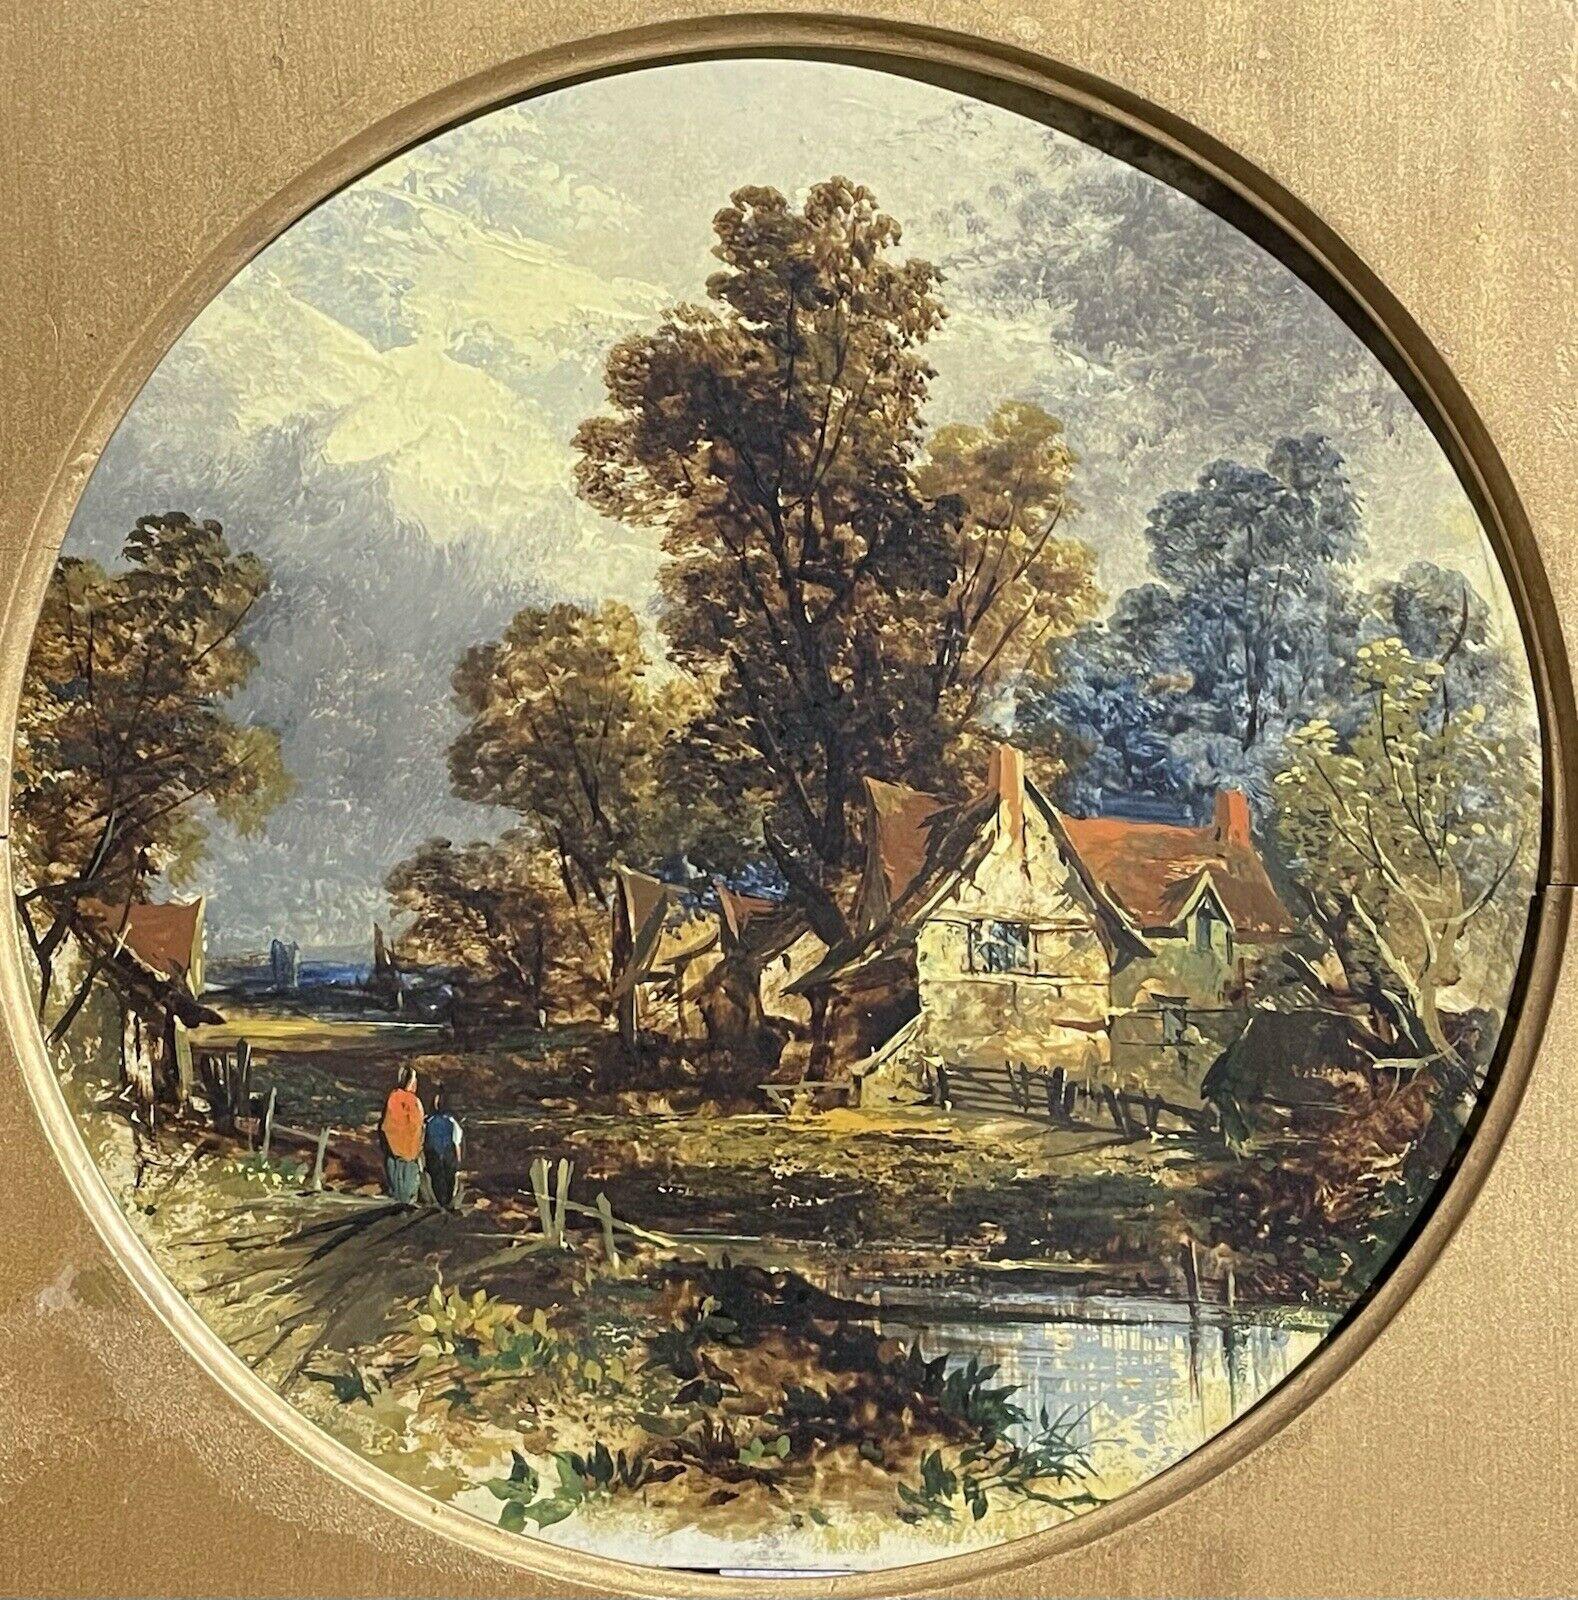 VICTORIAN OIL - FOLLOWER OF JOHN CONSTABLE - RURAL RIVER LANDSCAPE WITH FIGURES  - Painting by (Follower of) John Constable